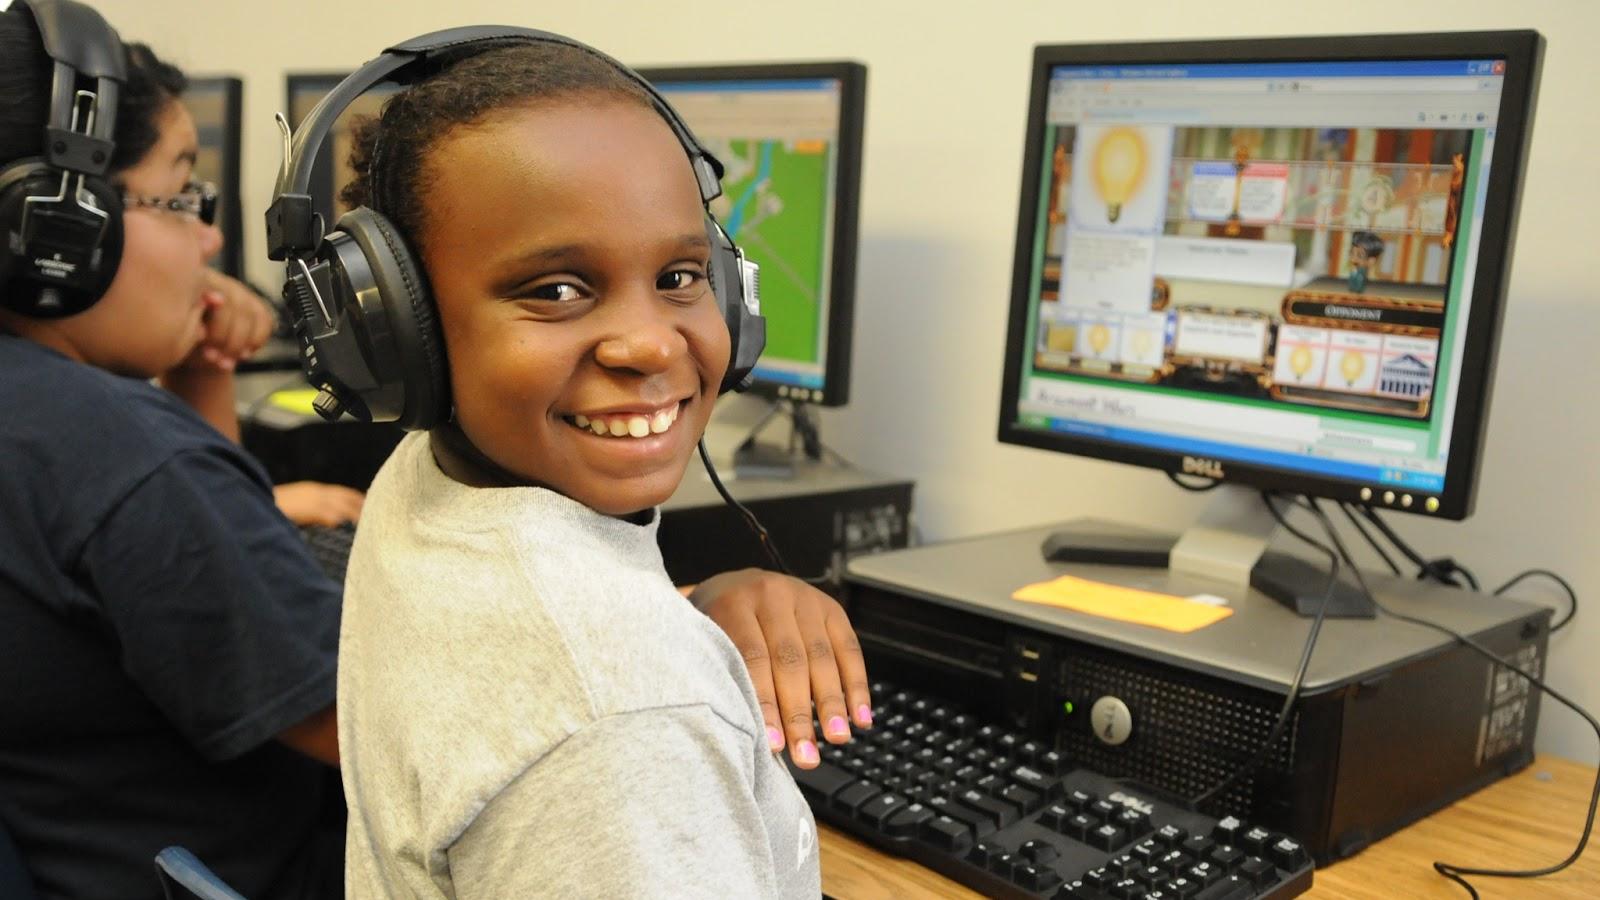 A child smiling while using a computer